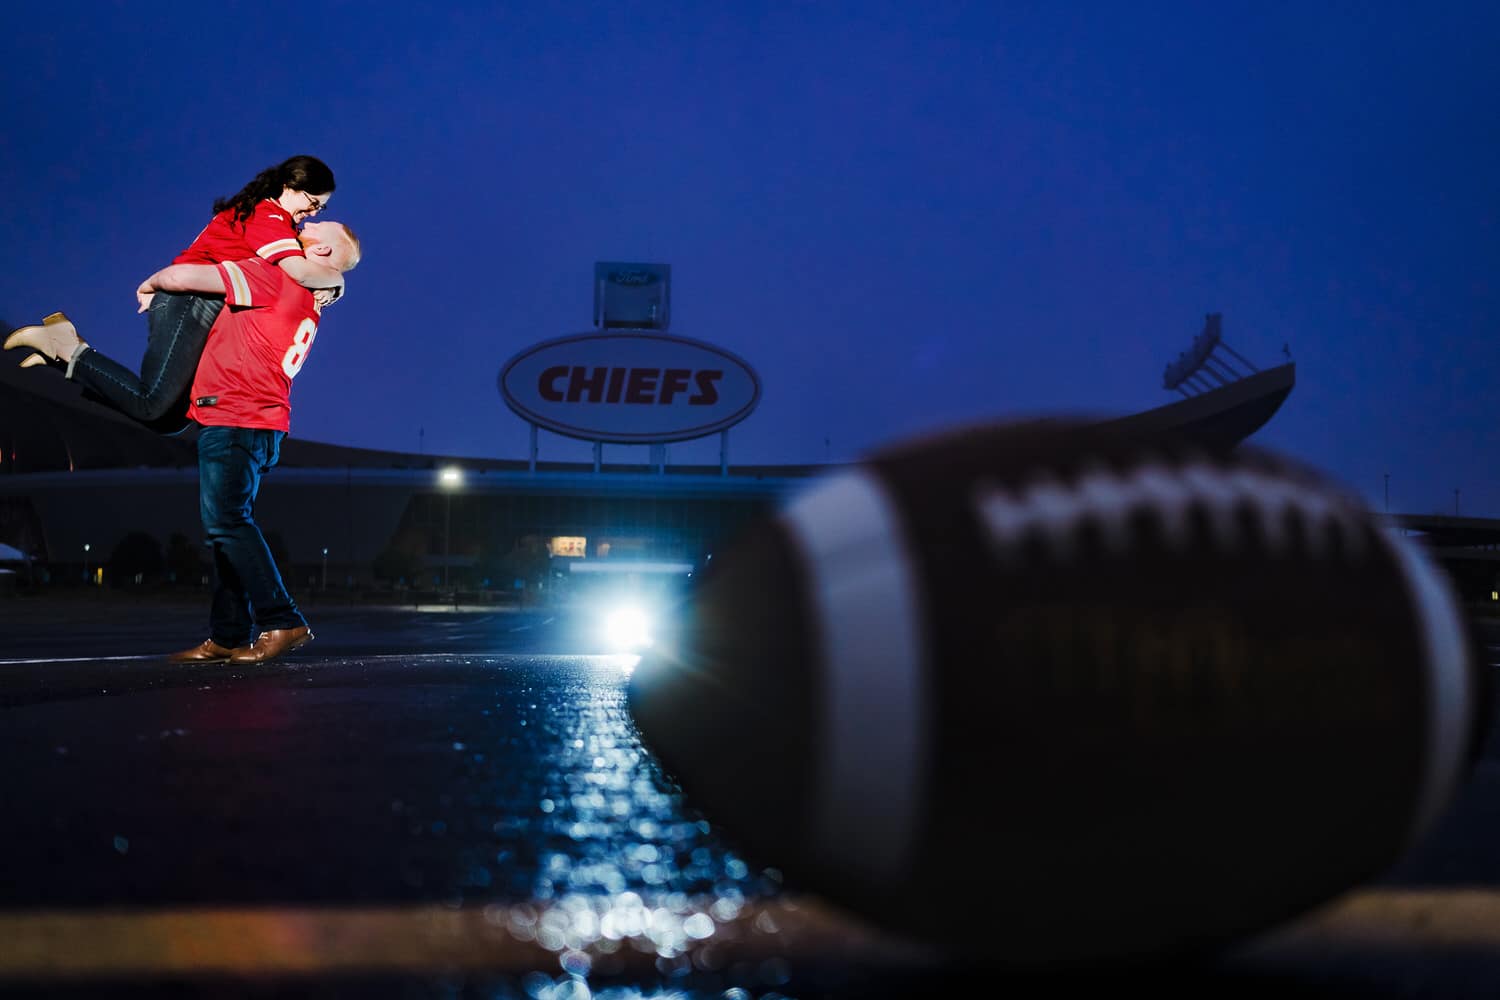 A vibrant, moody picture of an engaged couple in Chief's jerseys sharing an embrace in front of Arrowhead Stadium in the background of an image, with a football visible in the foreground of the image during a moody fall engagement session in Kansas city. 